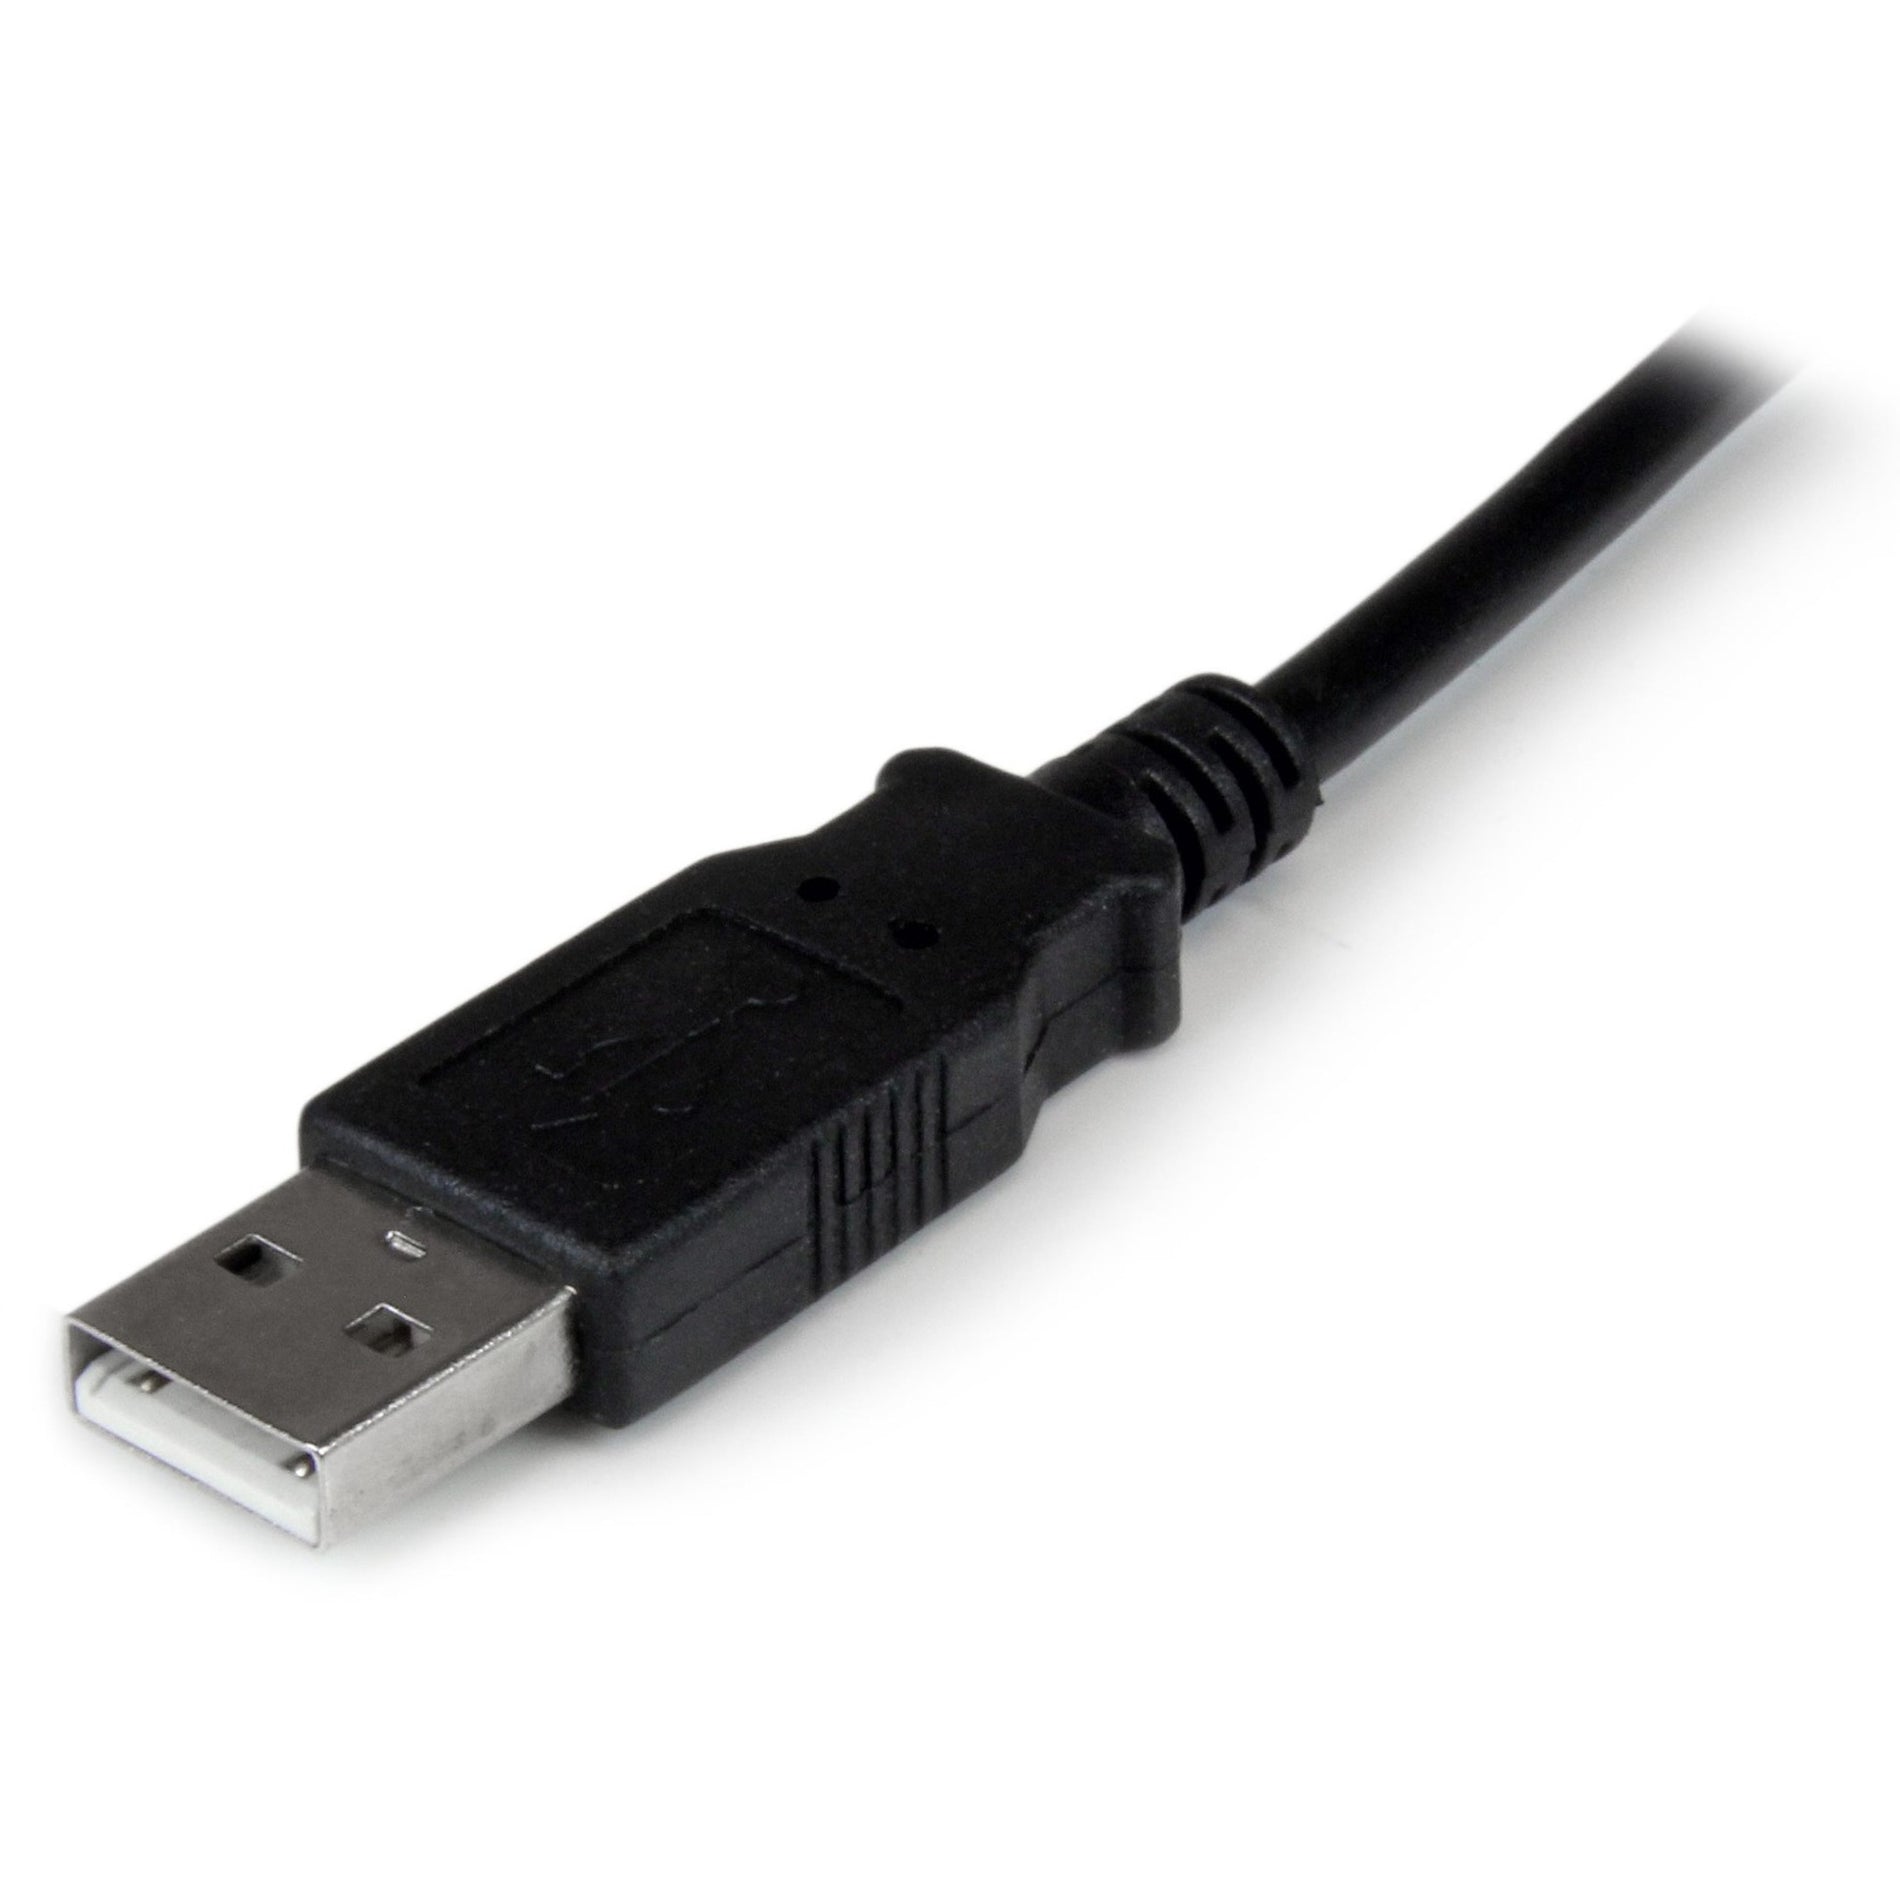 StarTech.com USB2DVIPRO2 USB to DVI Adapter - External USB Video Graphics Card for PC and MAC- 1920x1200, Warranty: 2 Year